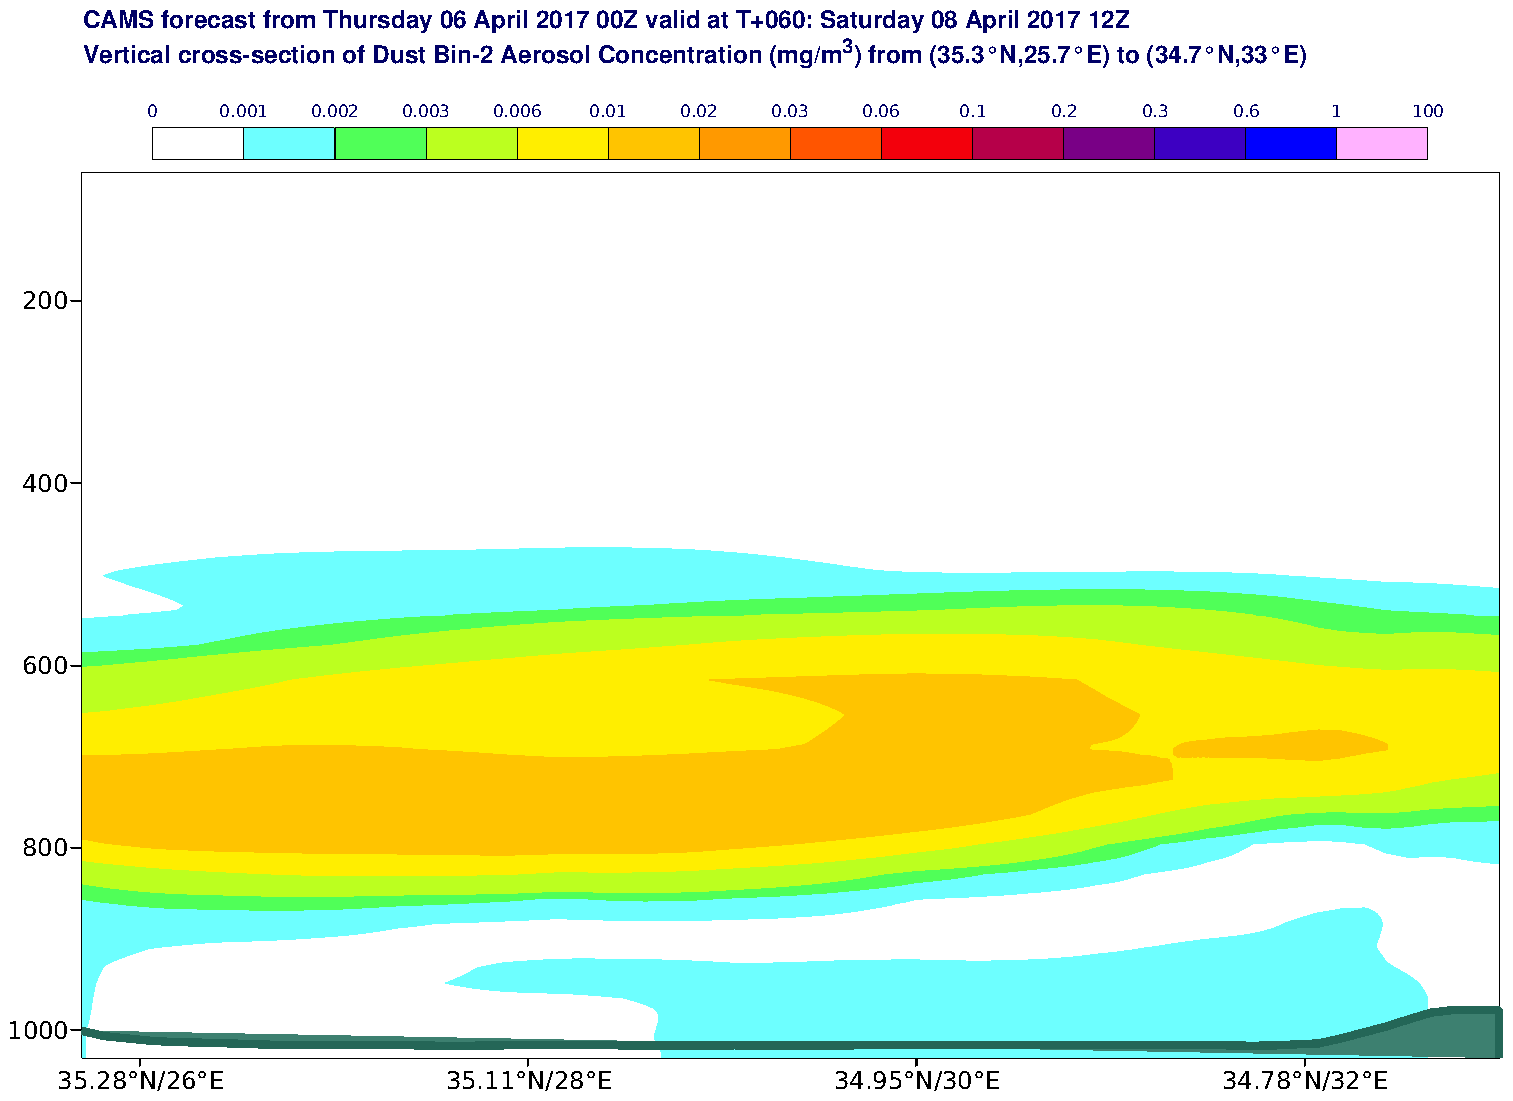 Vertical cross-section of Dust Bin-2 Aerosol Concentration (mg/m3) valid at T60 - 2017-04-08 12:00